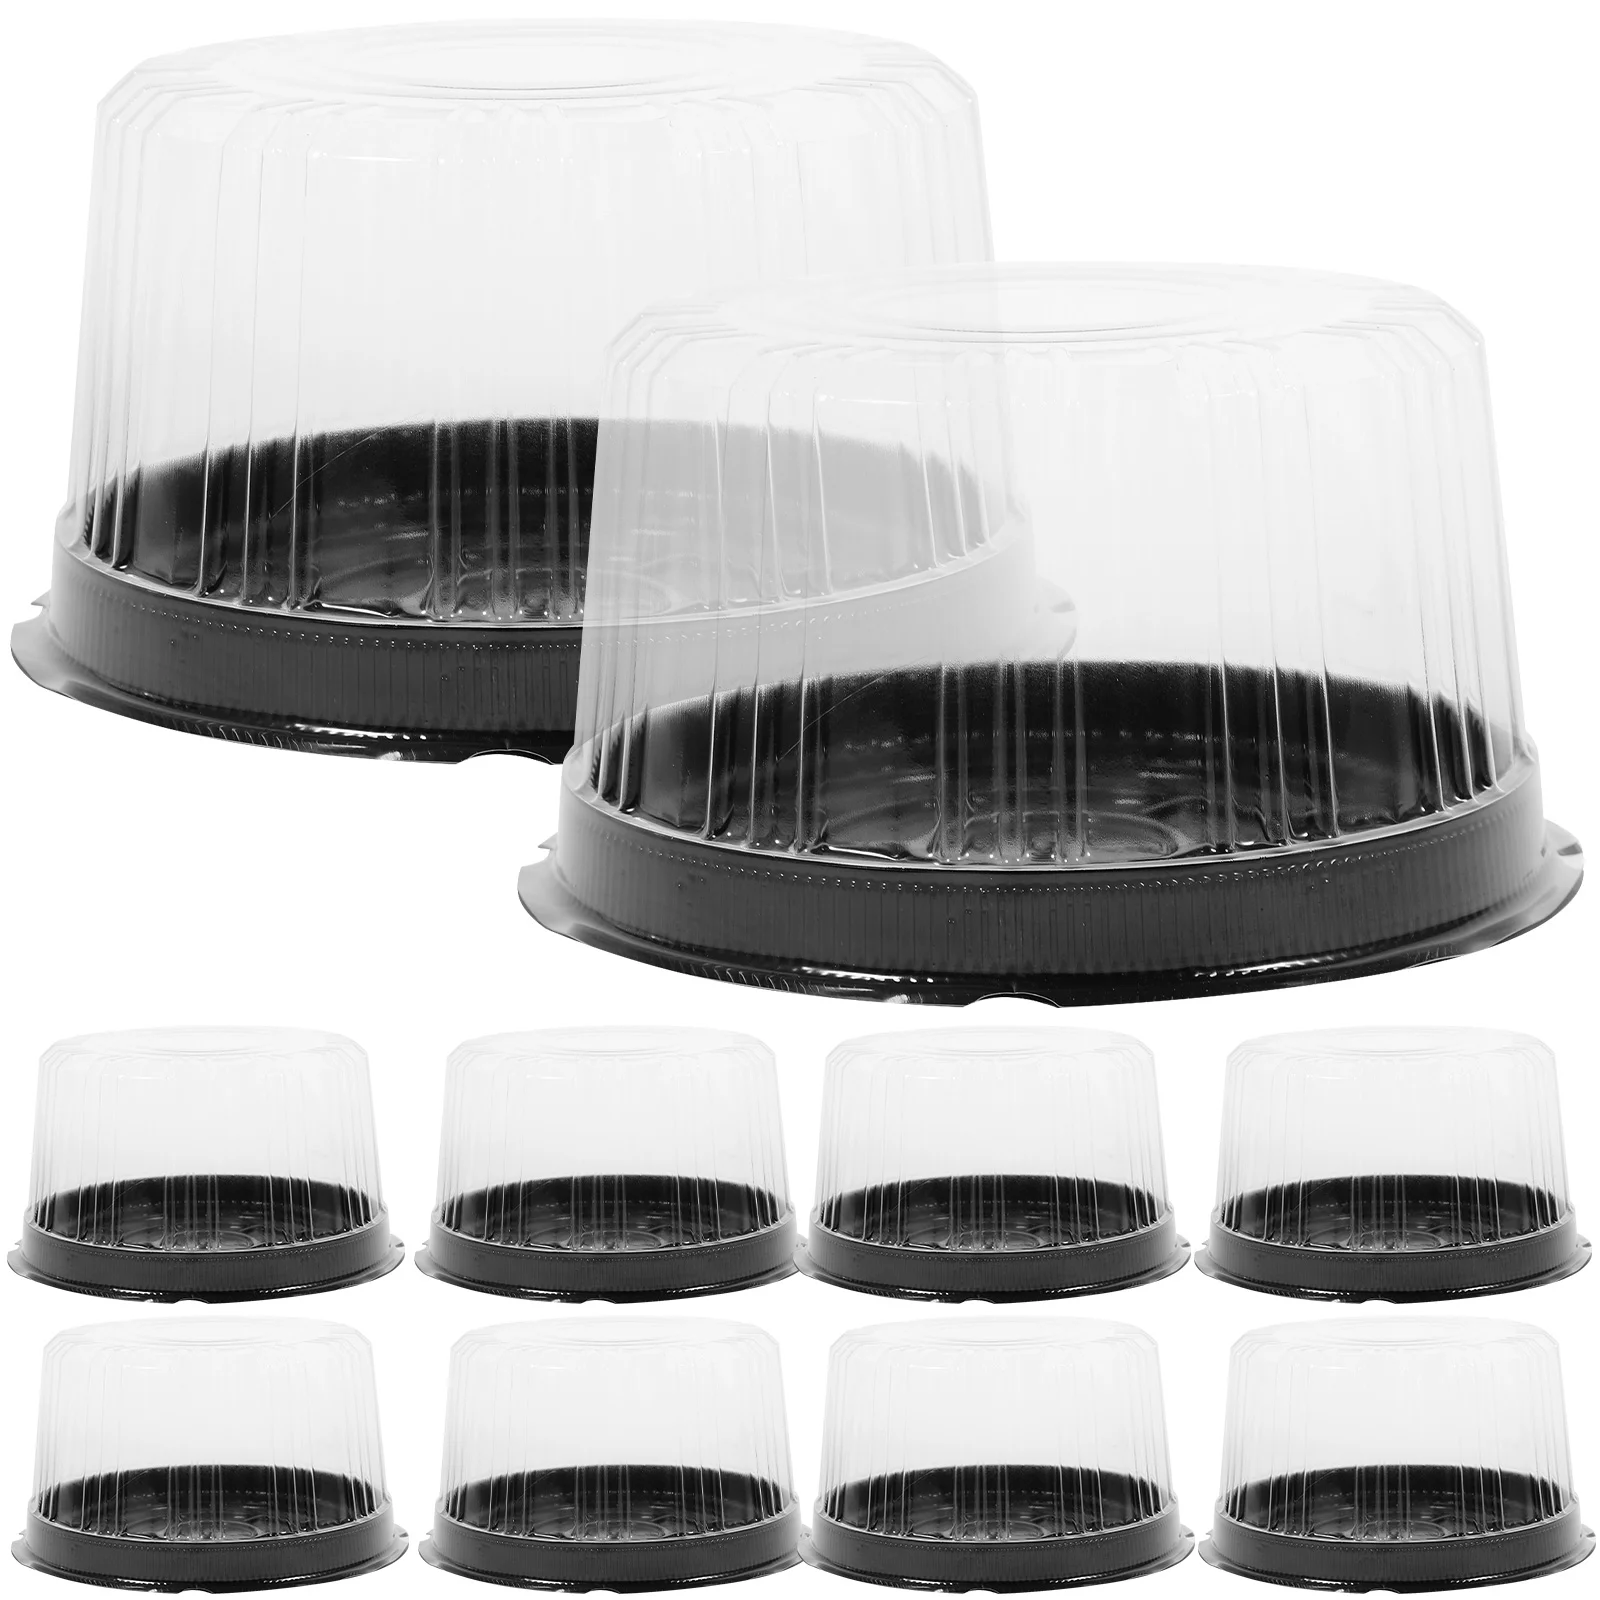 

Cake Carrier Box Containers Boxes Container Plastic Lids Round Dome Holder Clear Mini Carriers Disposable Cupcake Transport